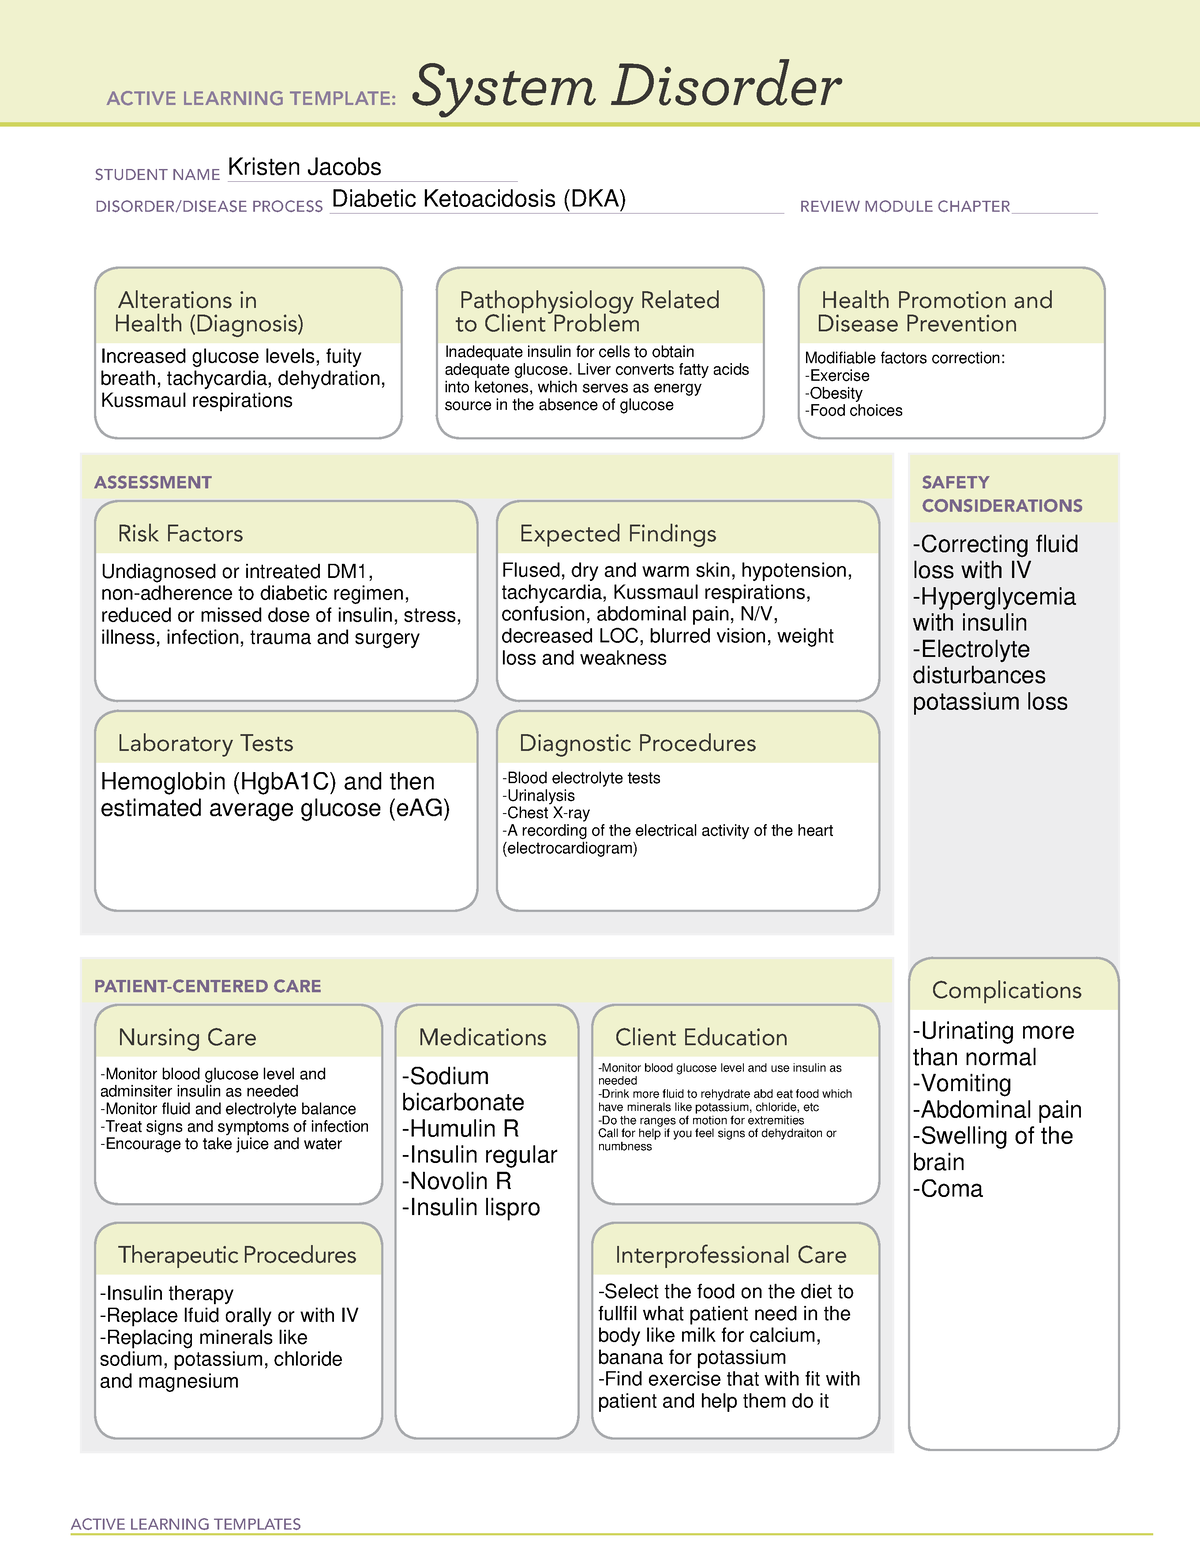 DKA System Disorder template ACTIVE LEARNING TEMPLATES System